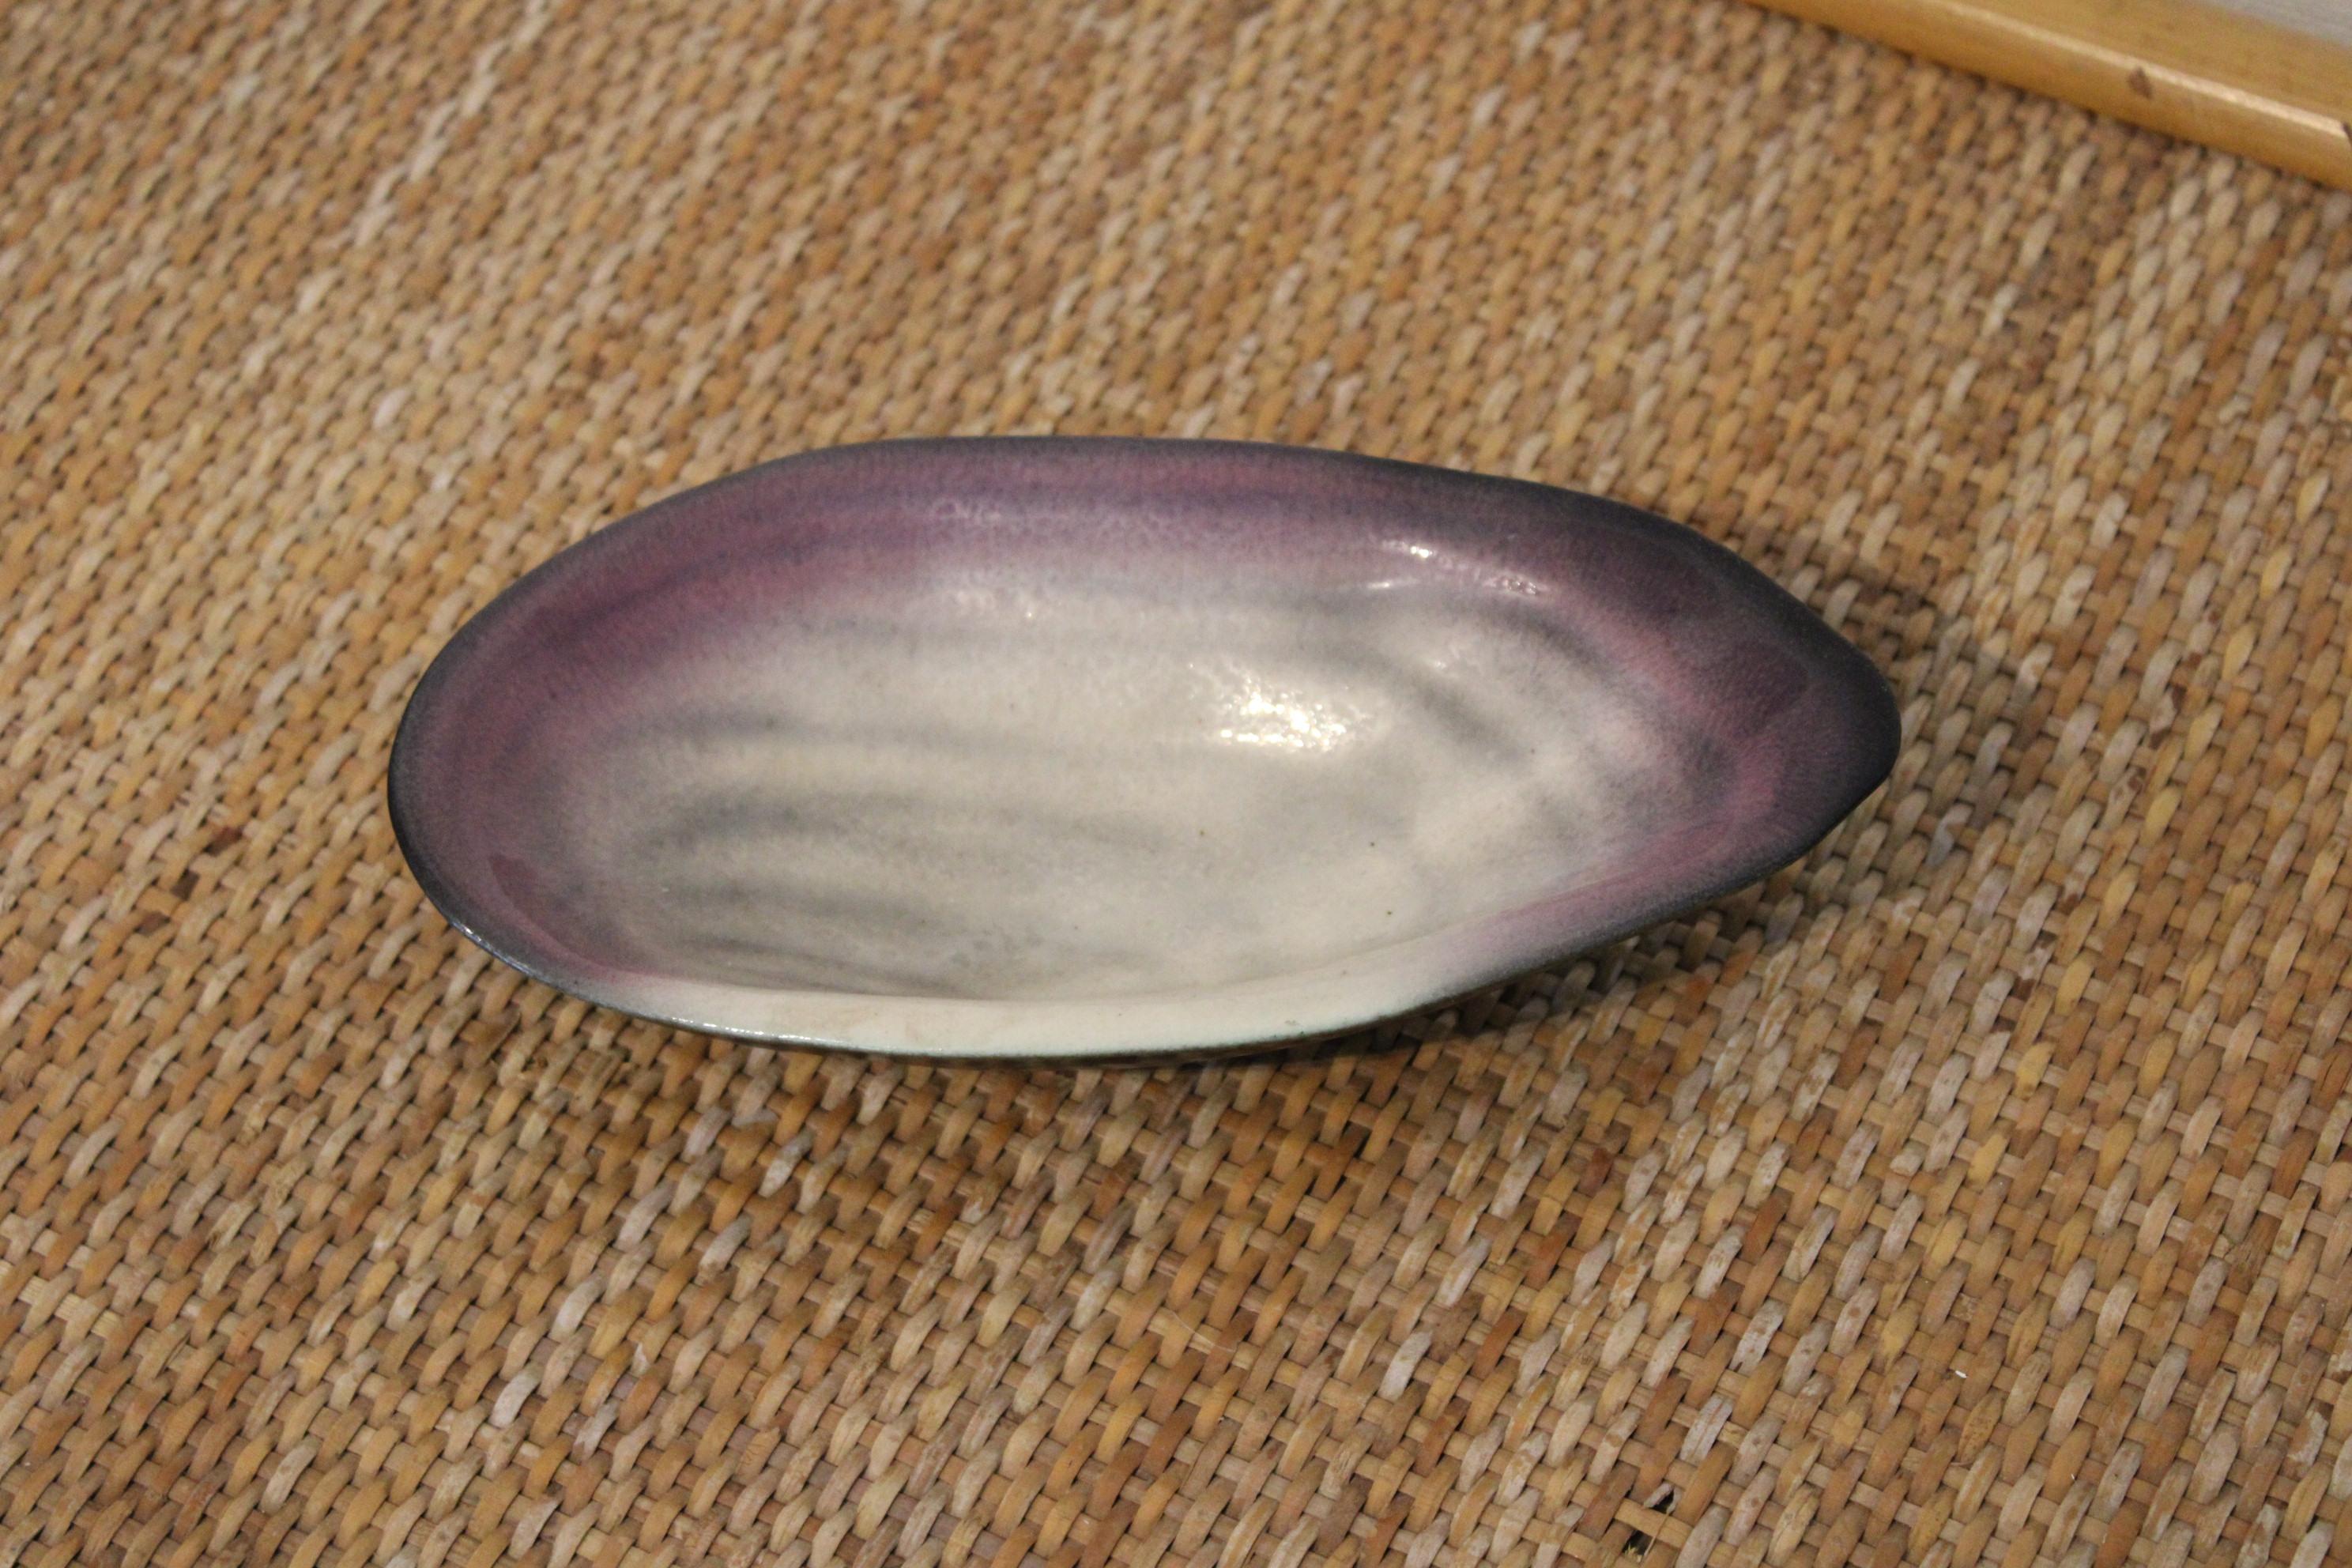 Enameled Ceramic shell dish by Pol Chambost